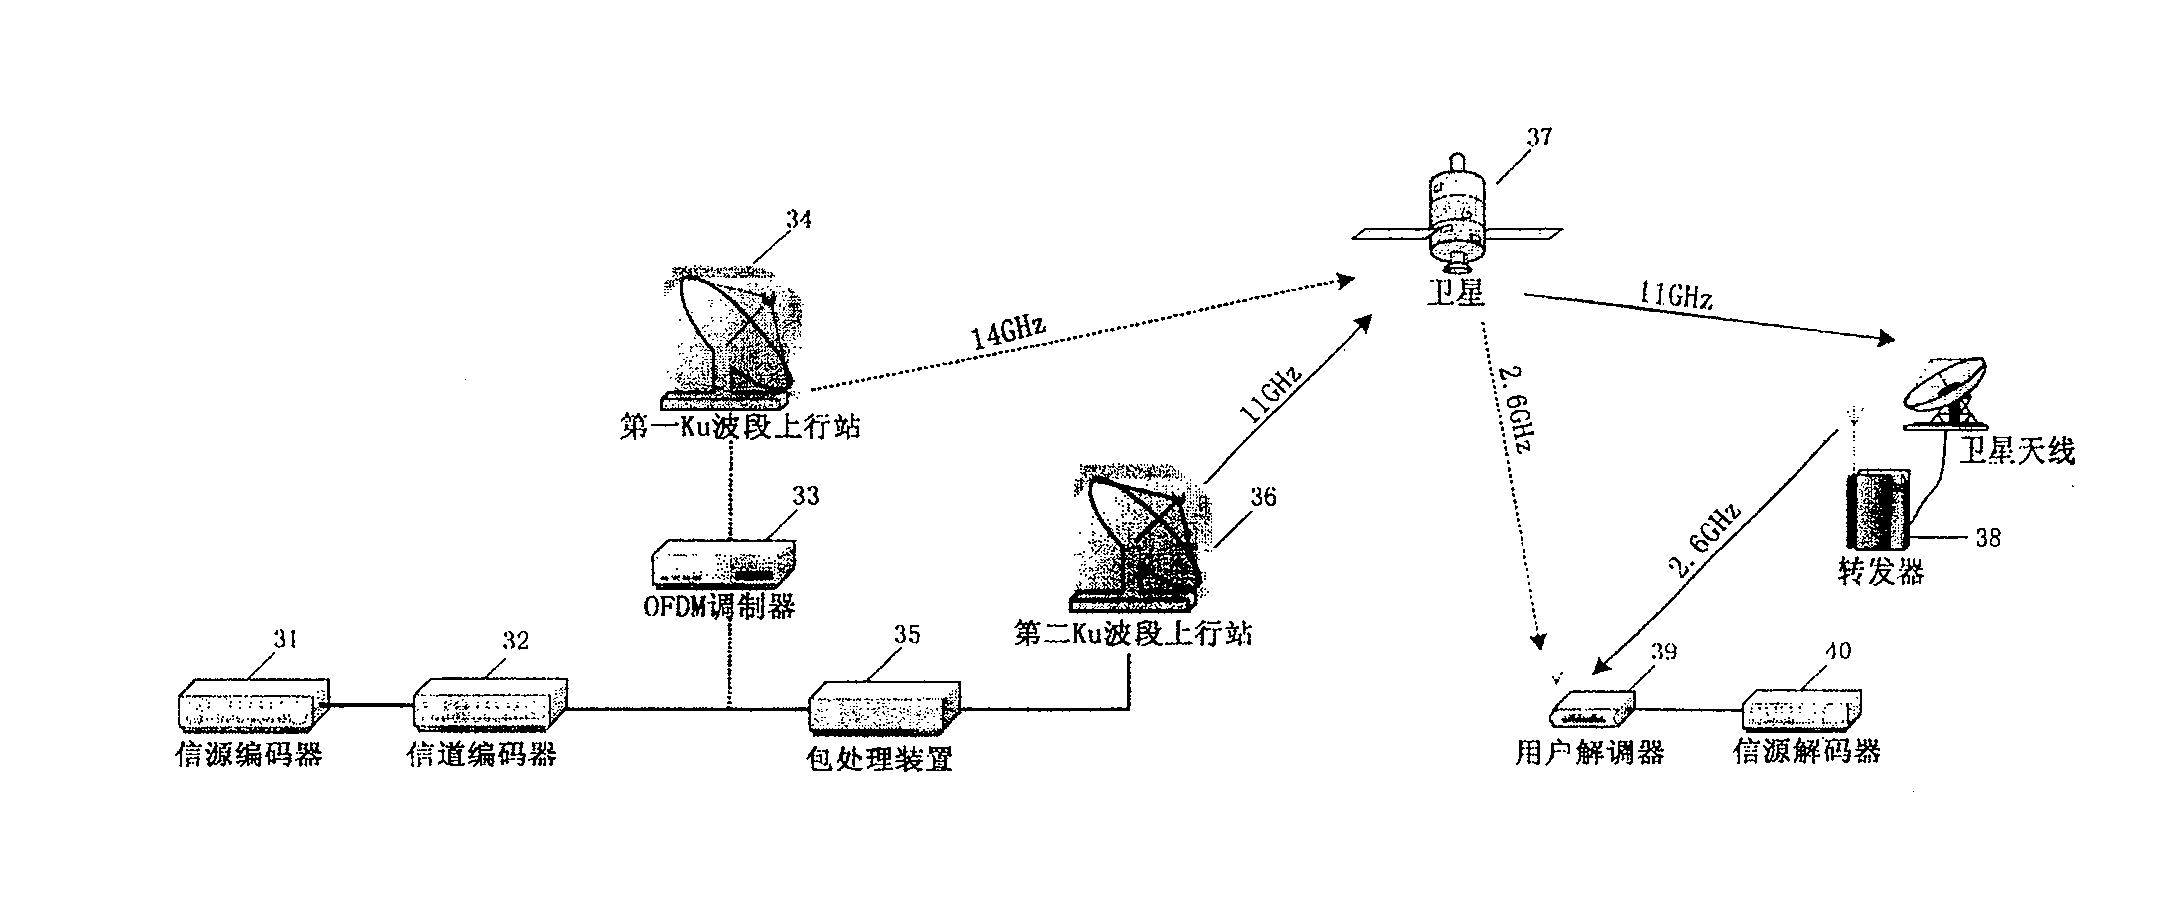 Data stream allocation system of digital broadcast transmitter and its allocation method